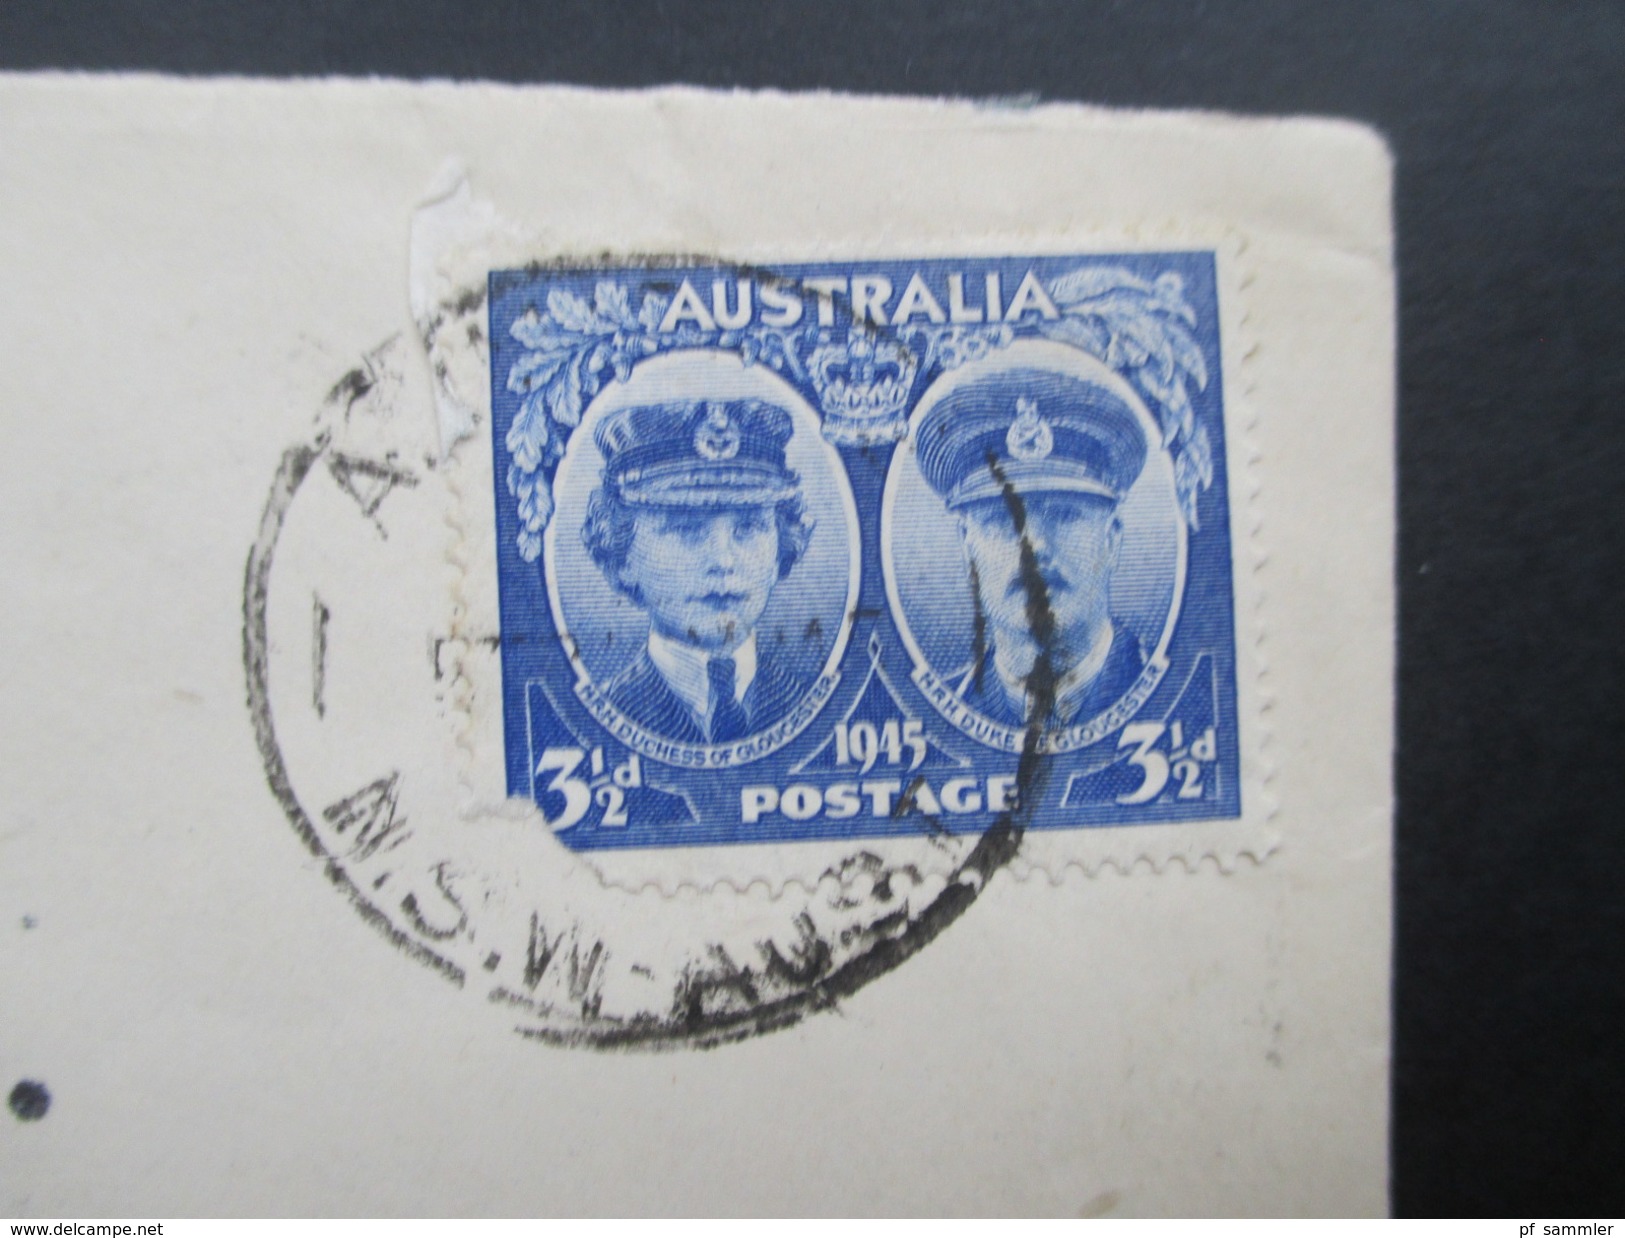 Australien 1945 NSW Australia - Chicago. Zensurbrief. Opened By Censor. 2 Passed By Censor 1626 - Covers & Documents